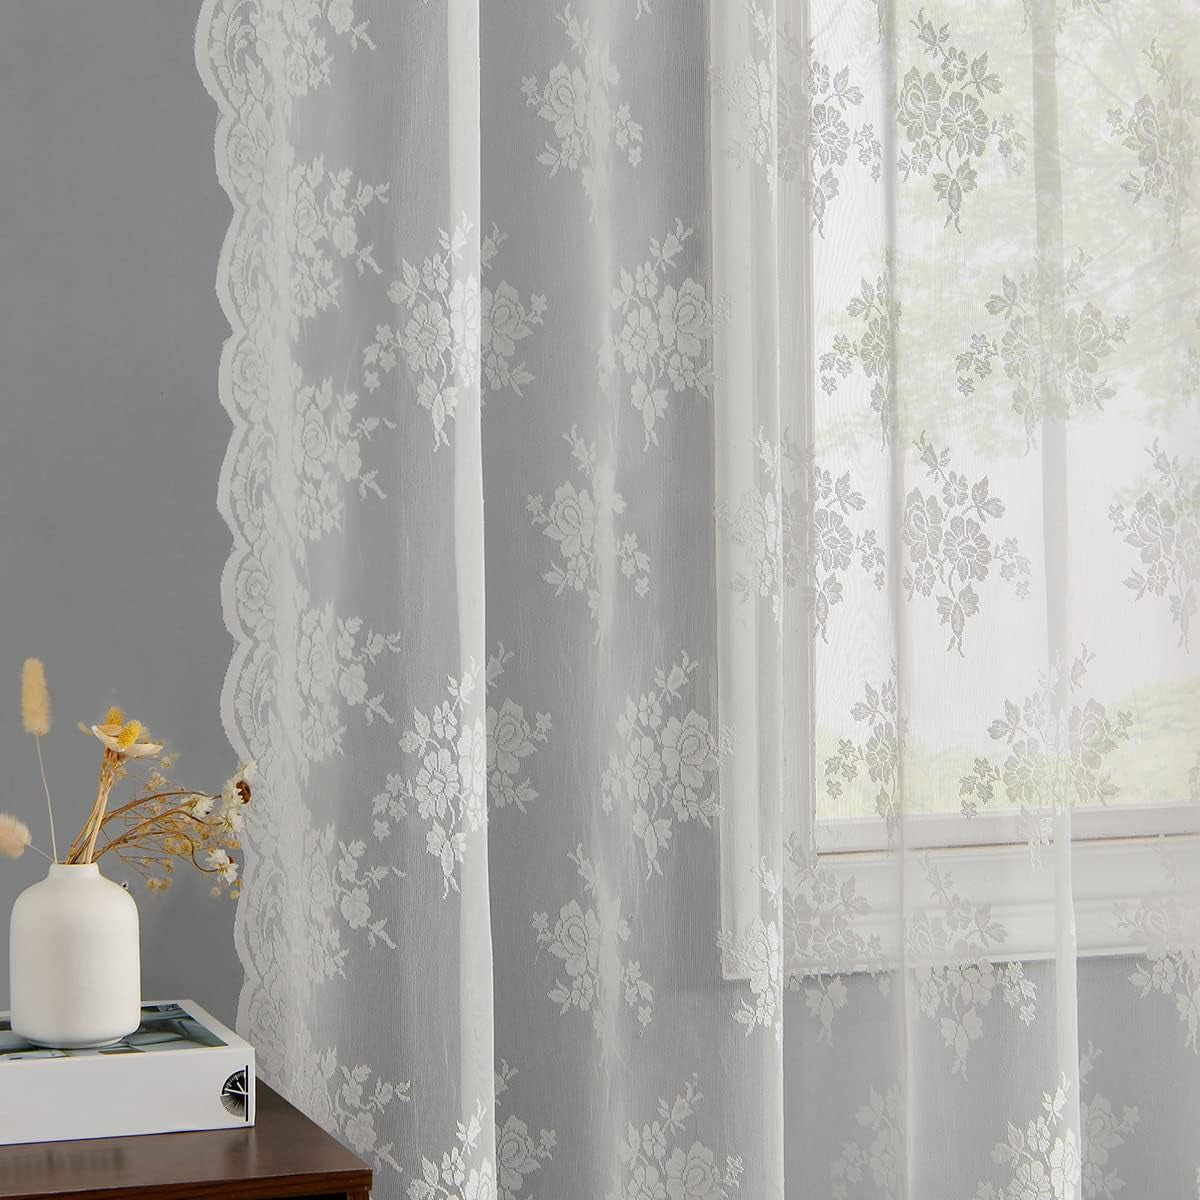 Kotile Sage Green Sheer Valance Curtain for Windows, Rustic Floral Spring Sheer Window Valance Curtain 18 Inch Length, Light Filtering Rod Pocket Lace Valance, 52 X 18 Inch, 1 Panel, Sage Green  Kotile Textile Ivory 52 In X 95 In Grommet 